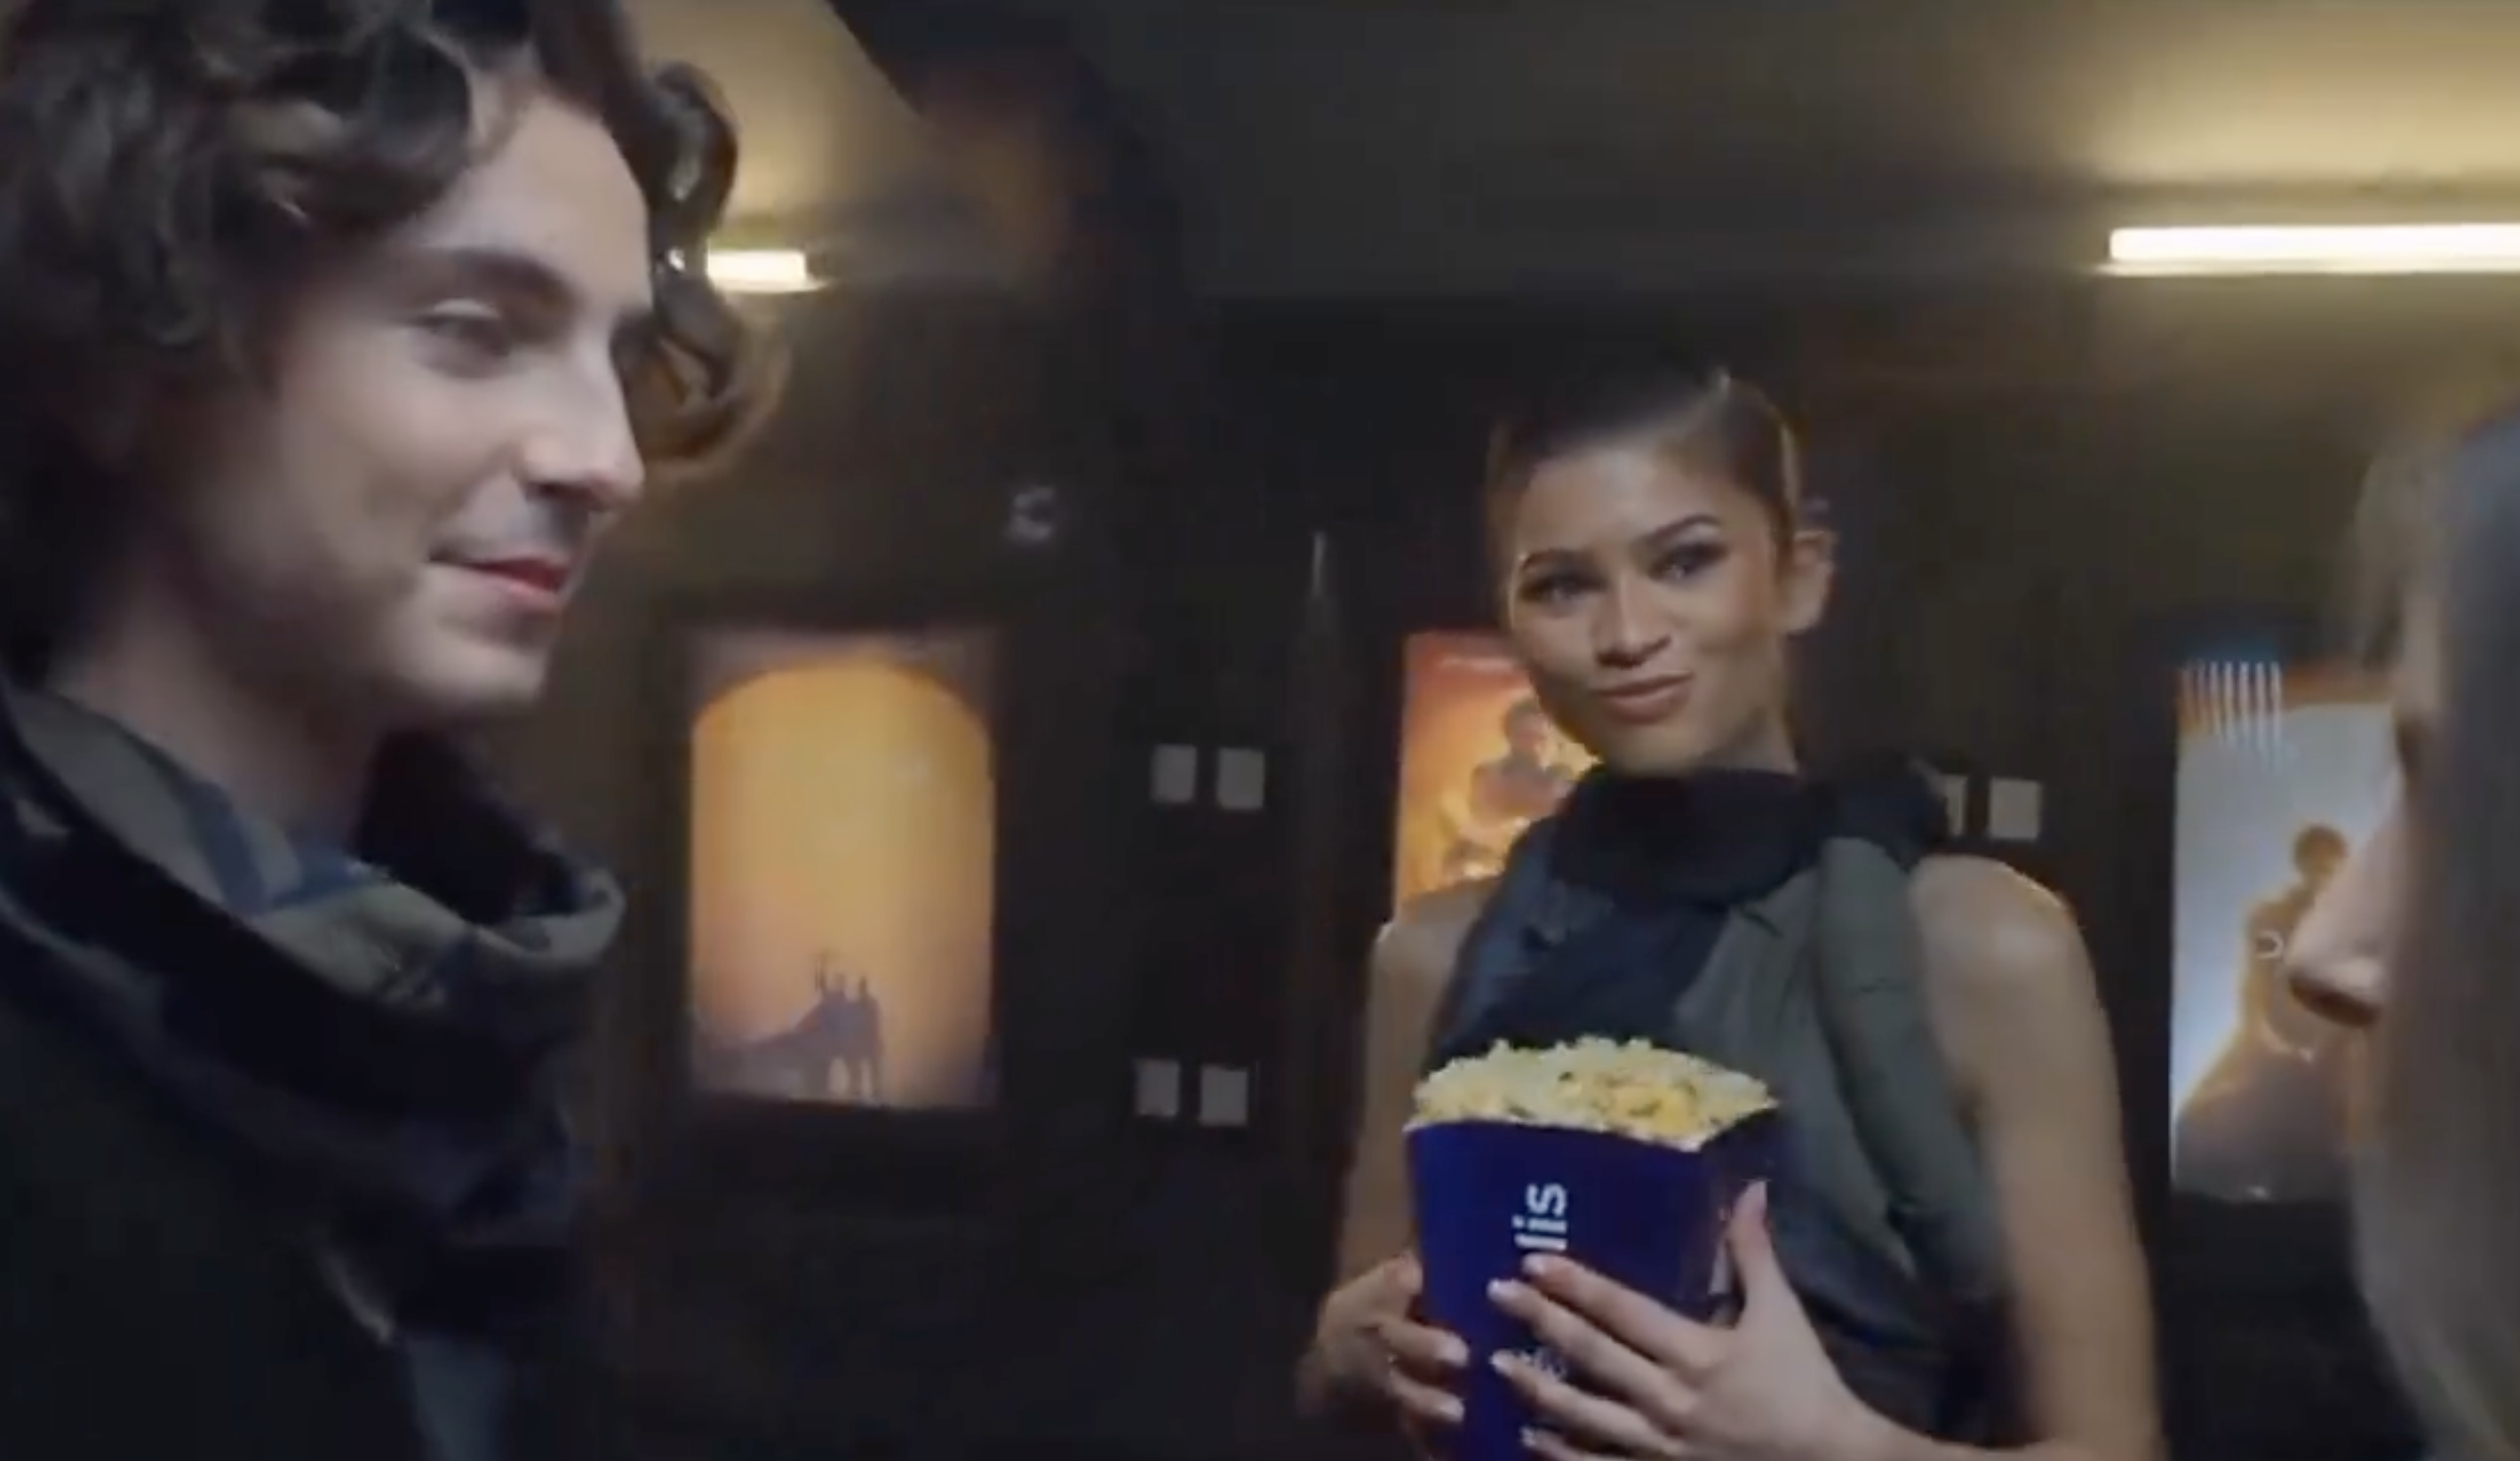 Timmy and Zendaya in a movie theater scene looking at another actor, with Zendaya holding a tub of popcorn